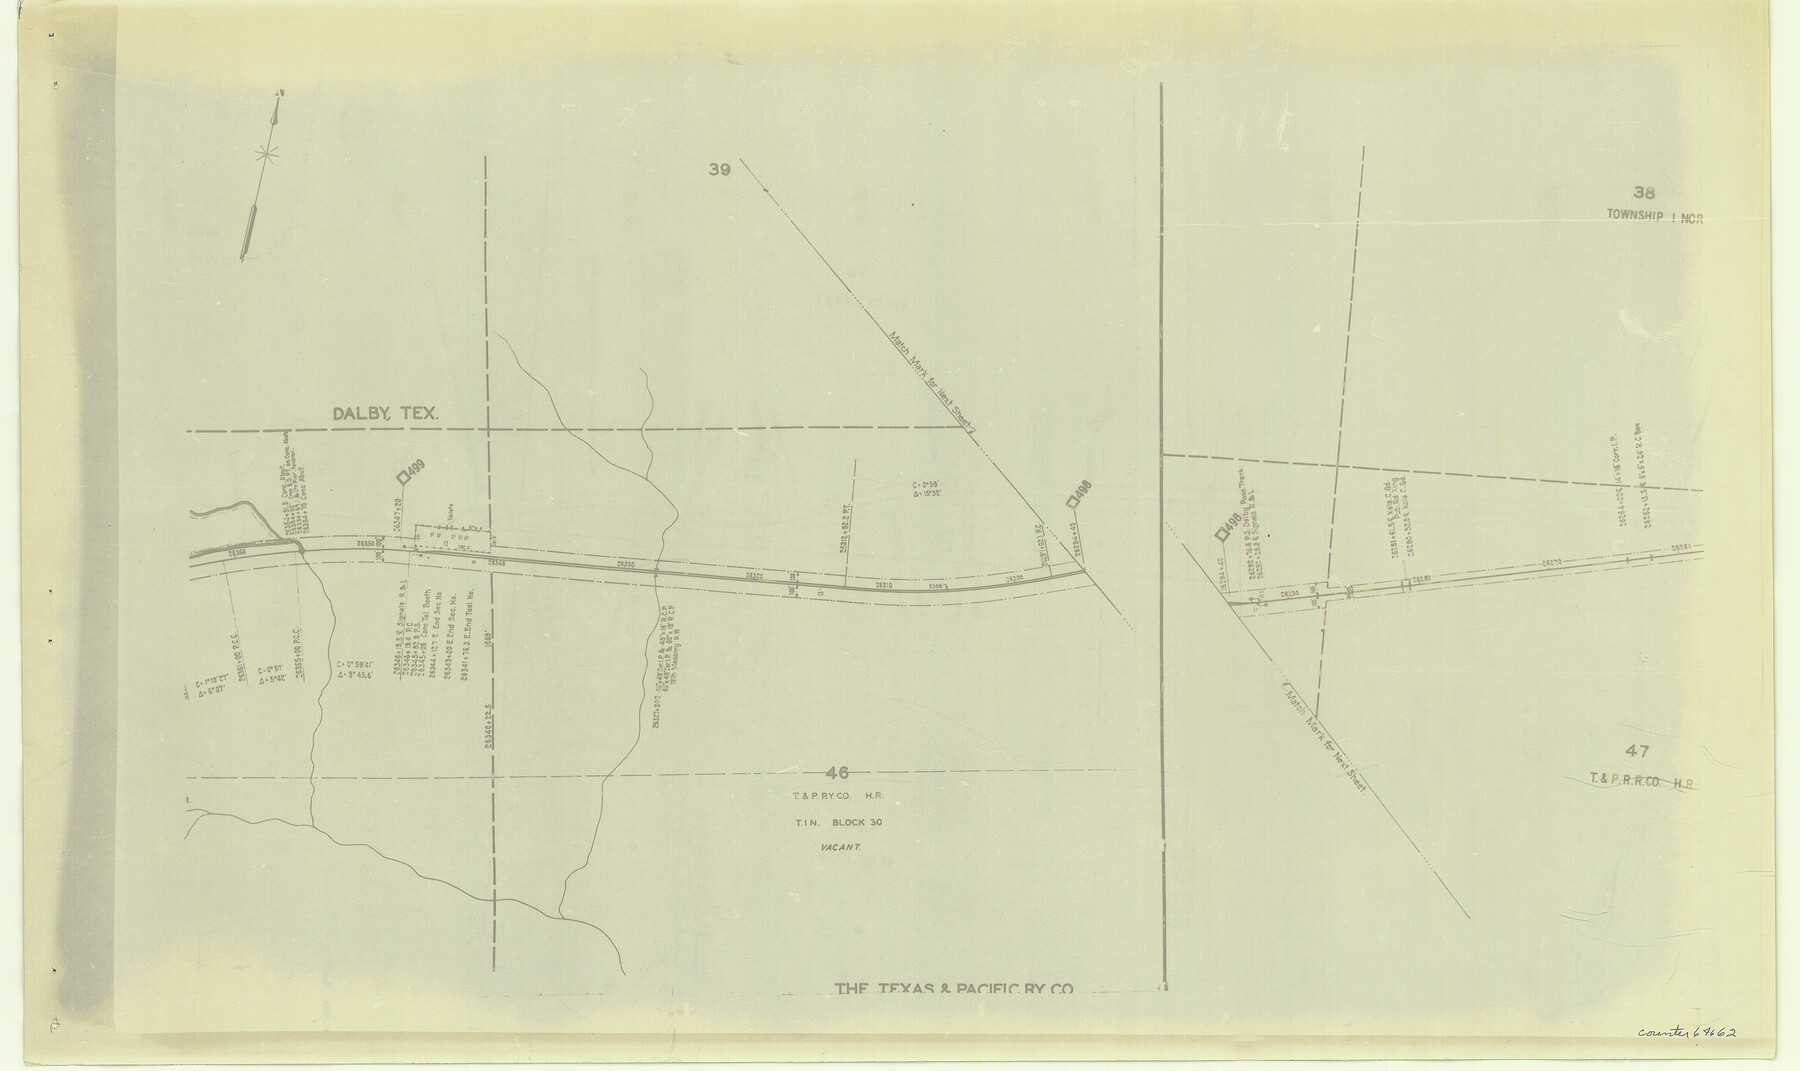 64662, [Right of Way & Track Map, The Texas & Pacific Ry. Co. Main Line], General Map Collection